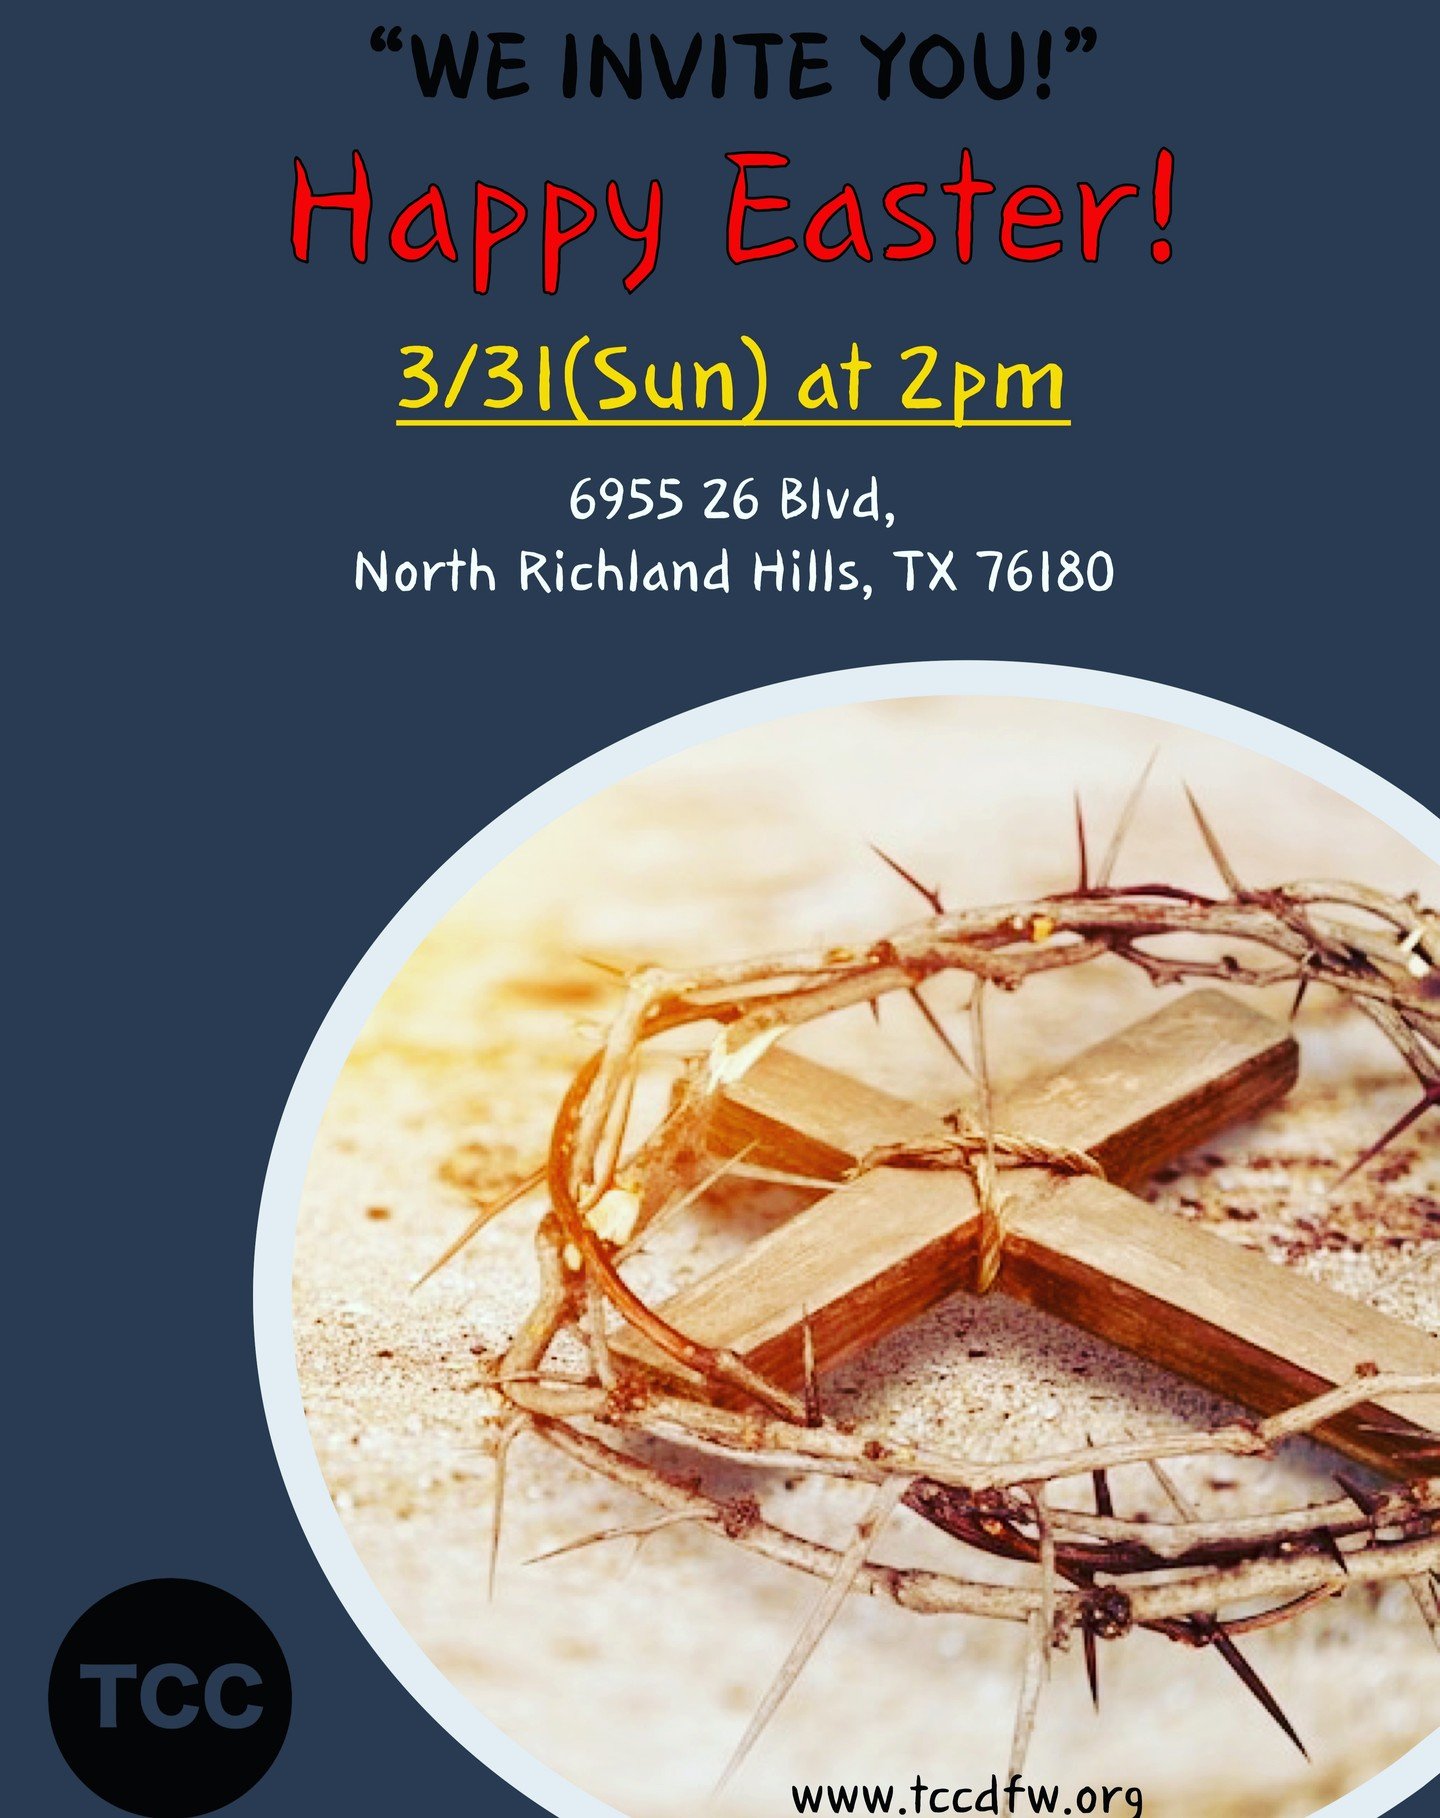 We @tccdfw invite people to our Easter Worship Service! 3/31(Next Sunday) at 2pm. All the generations will gather together as one body of Christ for celebration of Easter! Our hope Christ Jesus is risen from the dead! Please, come and join us for nex